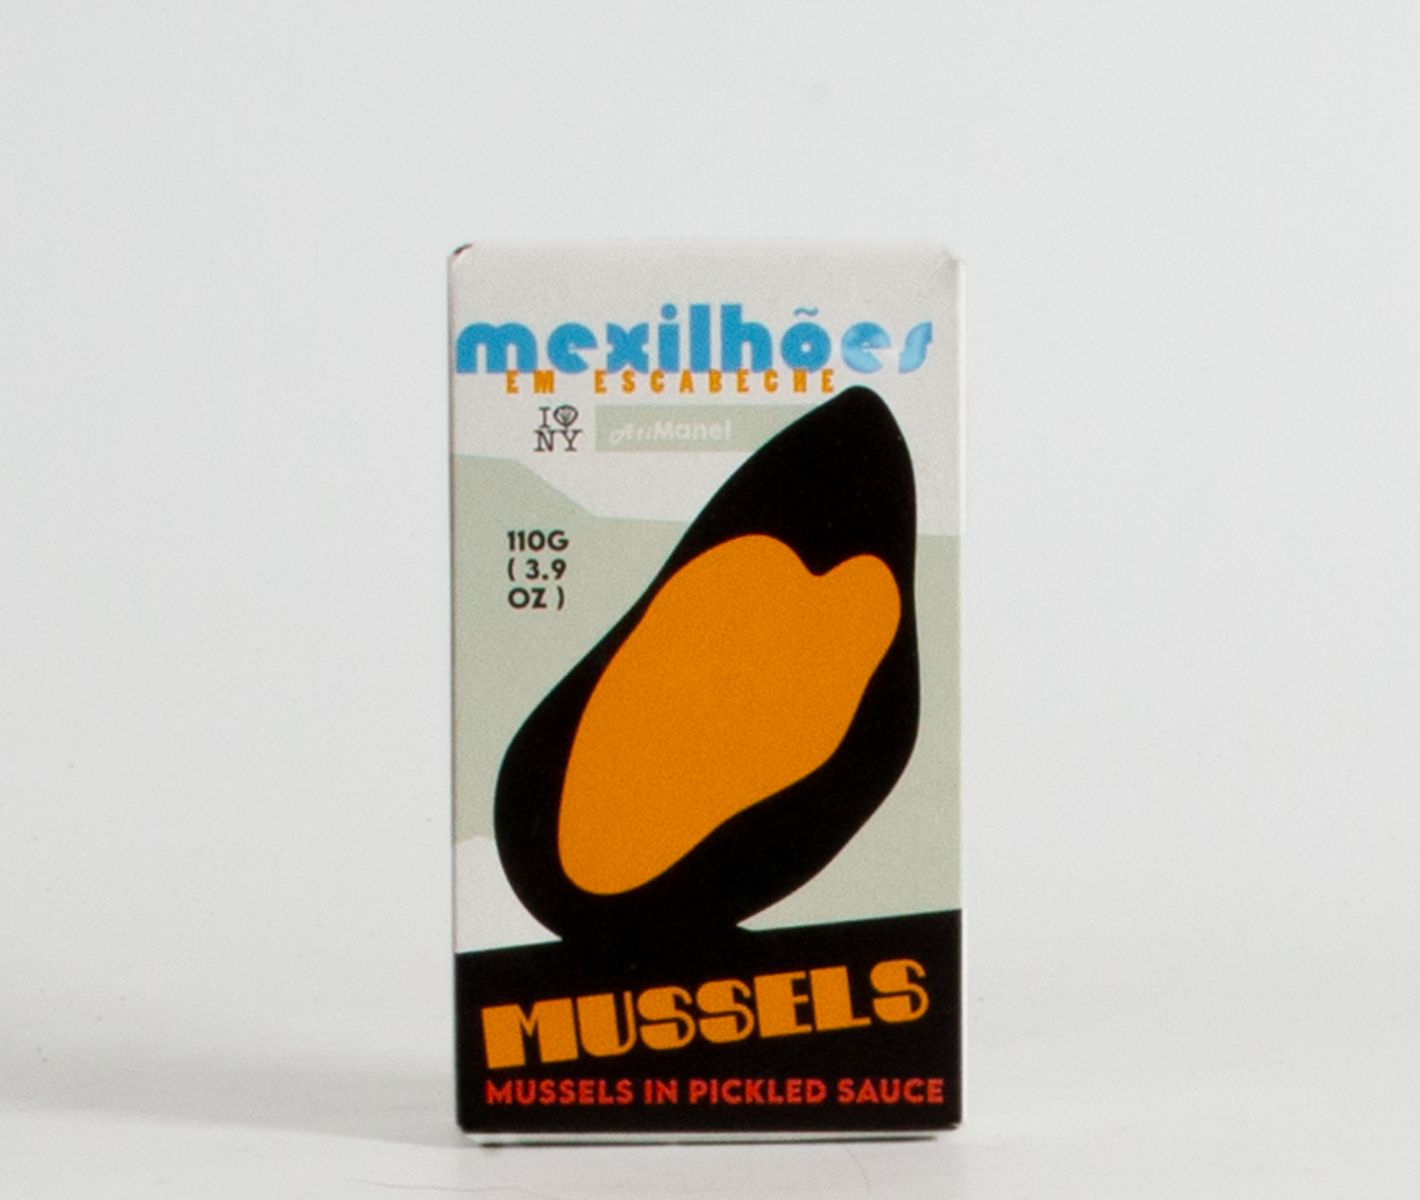 Mussels In Pickled Sauce (110g)